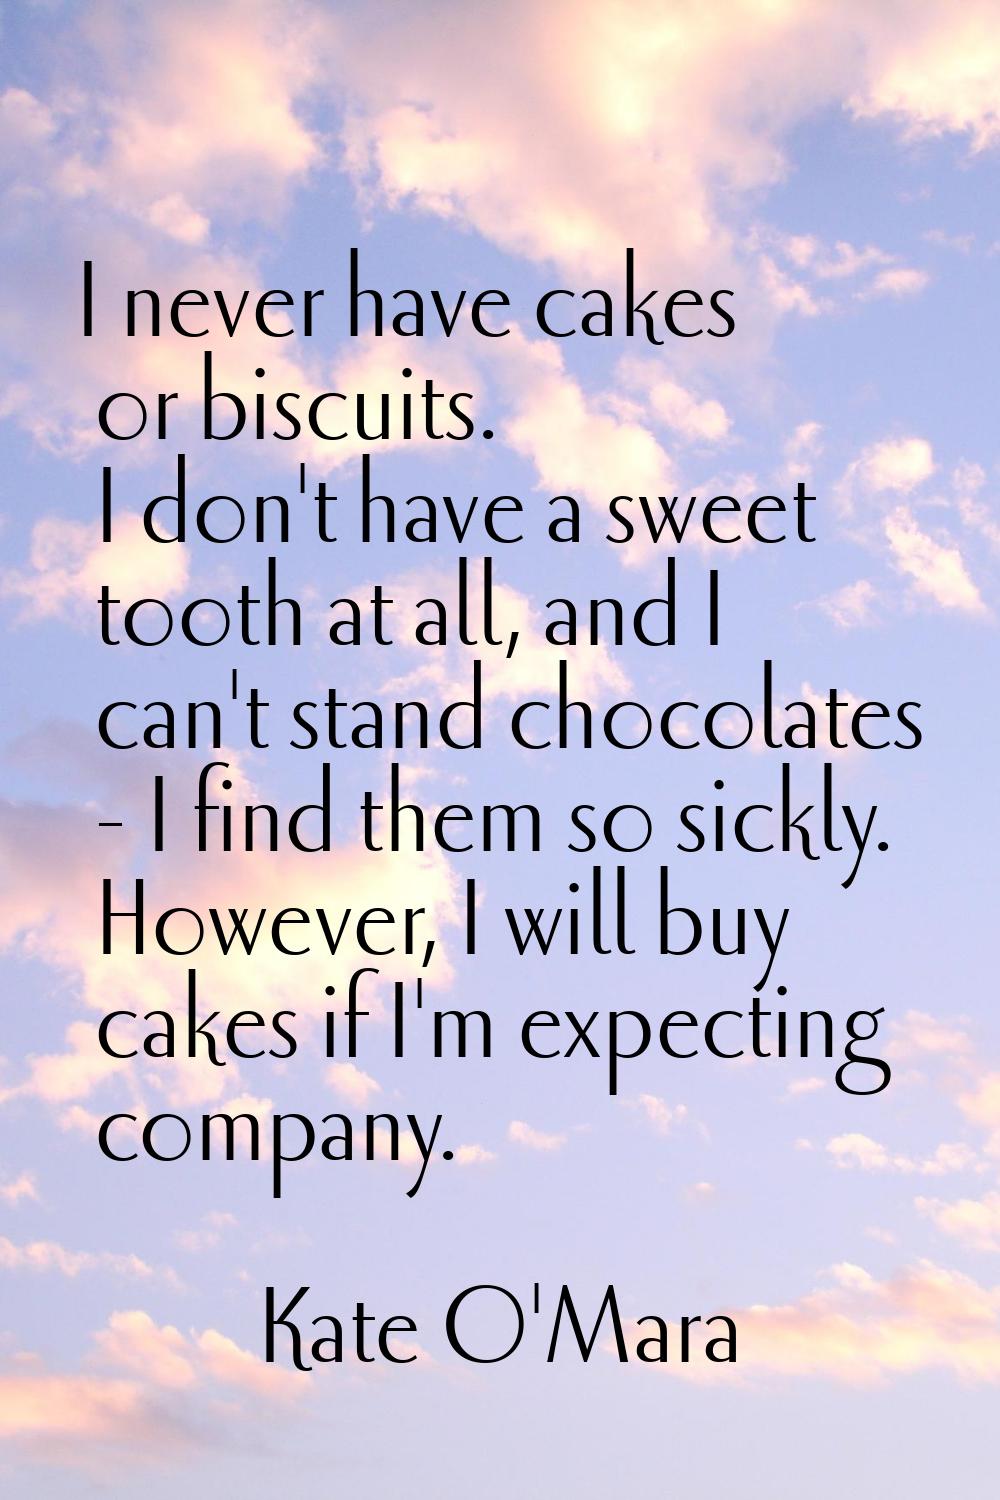 I never have cakes or biscuits. I don't have a sweet tooth at all, and I can't stand chocolates - I